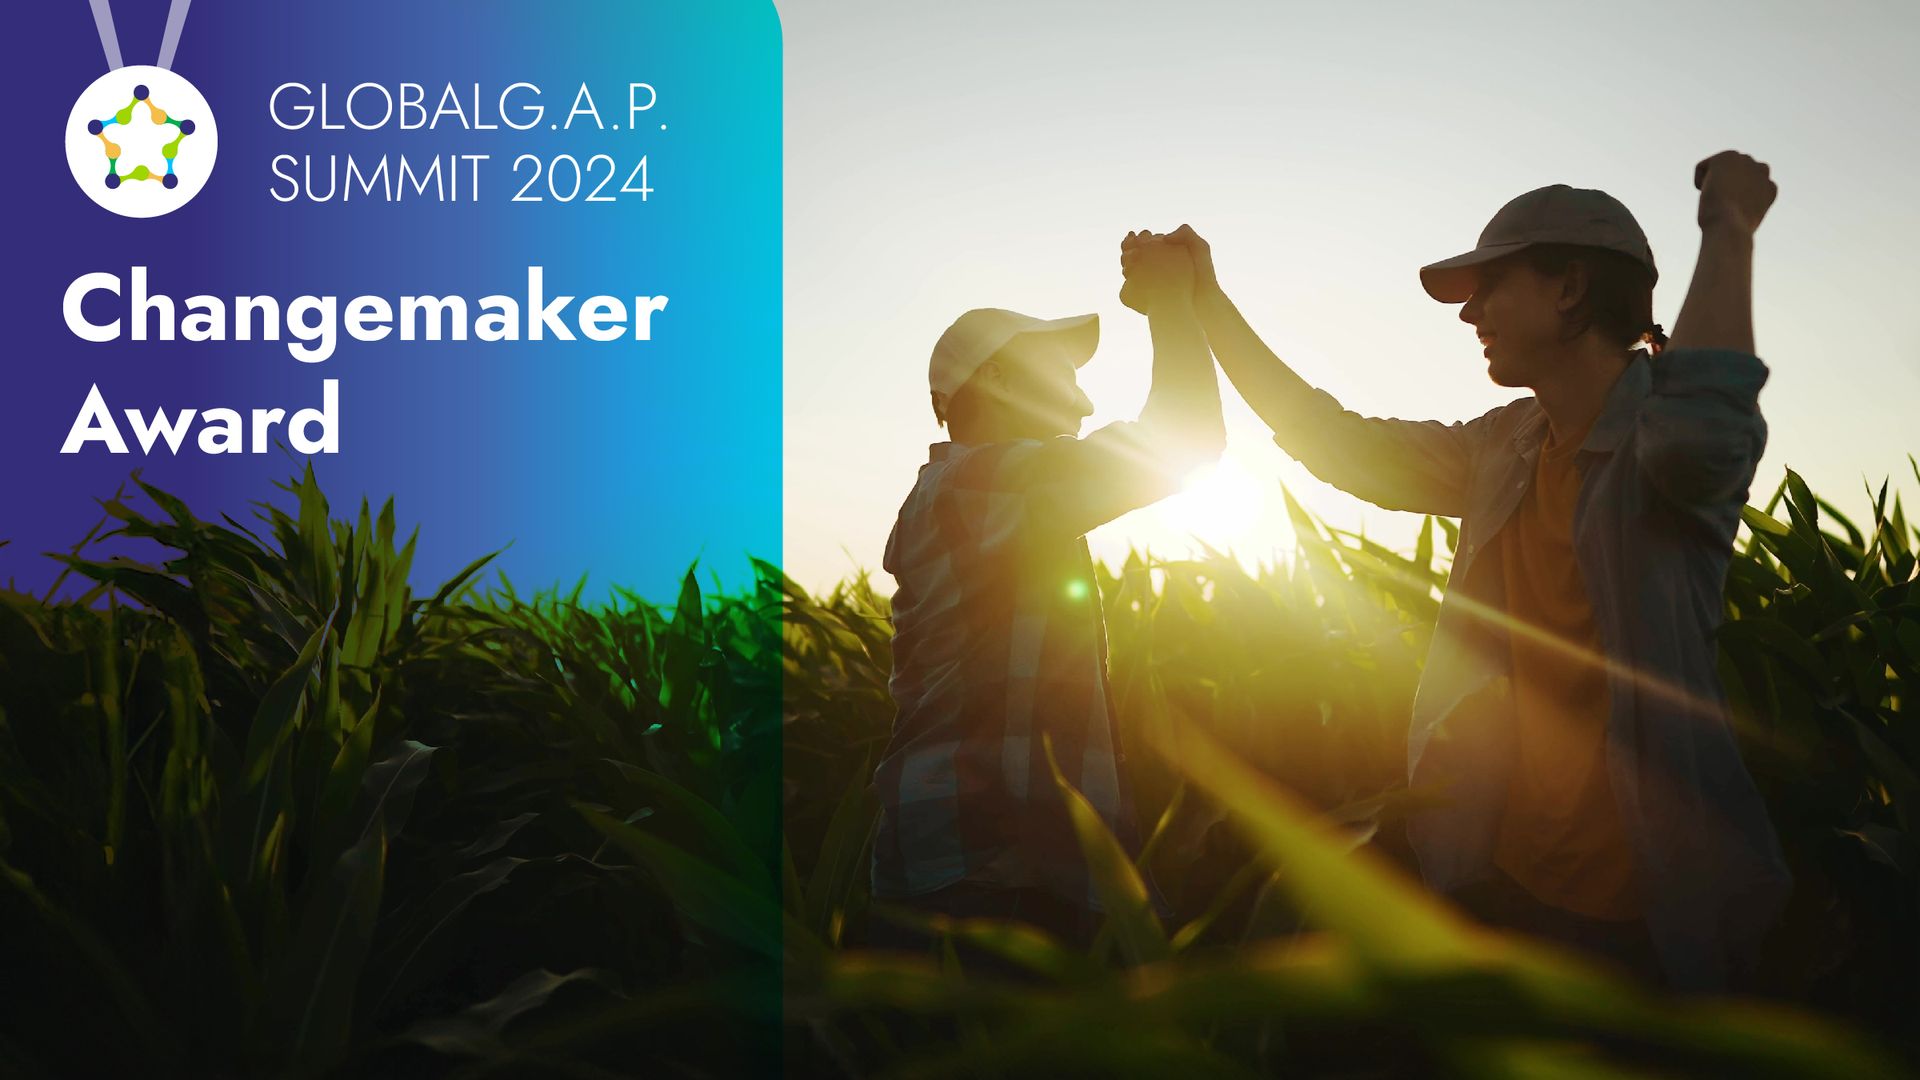 An advertisement banner for the launch of the Changemaker Awards, to be announced during the GLOBALG.A.P. SUMMIT 2024